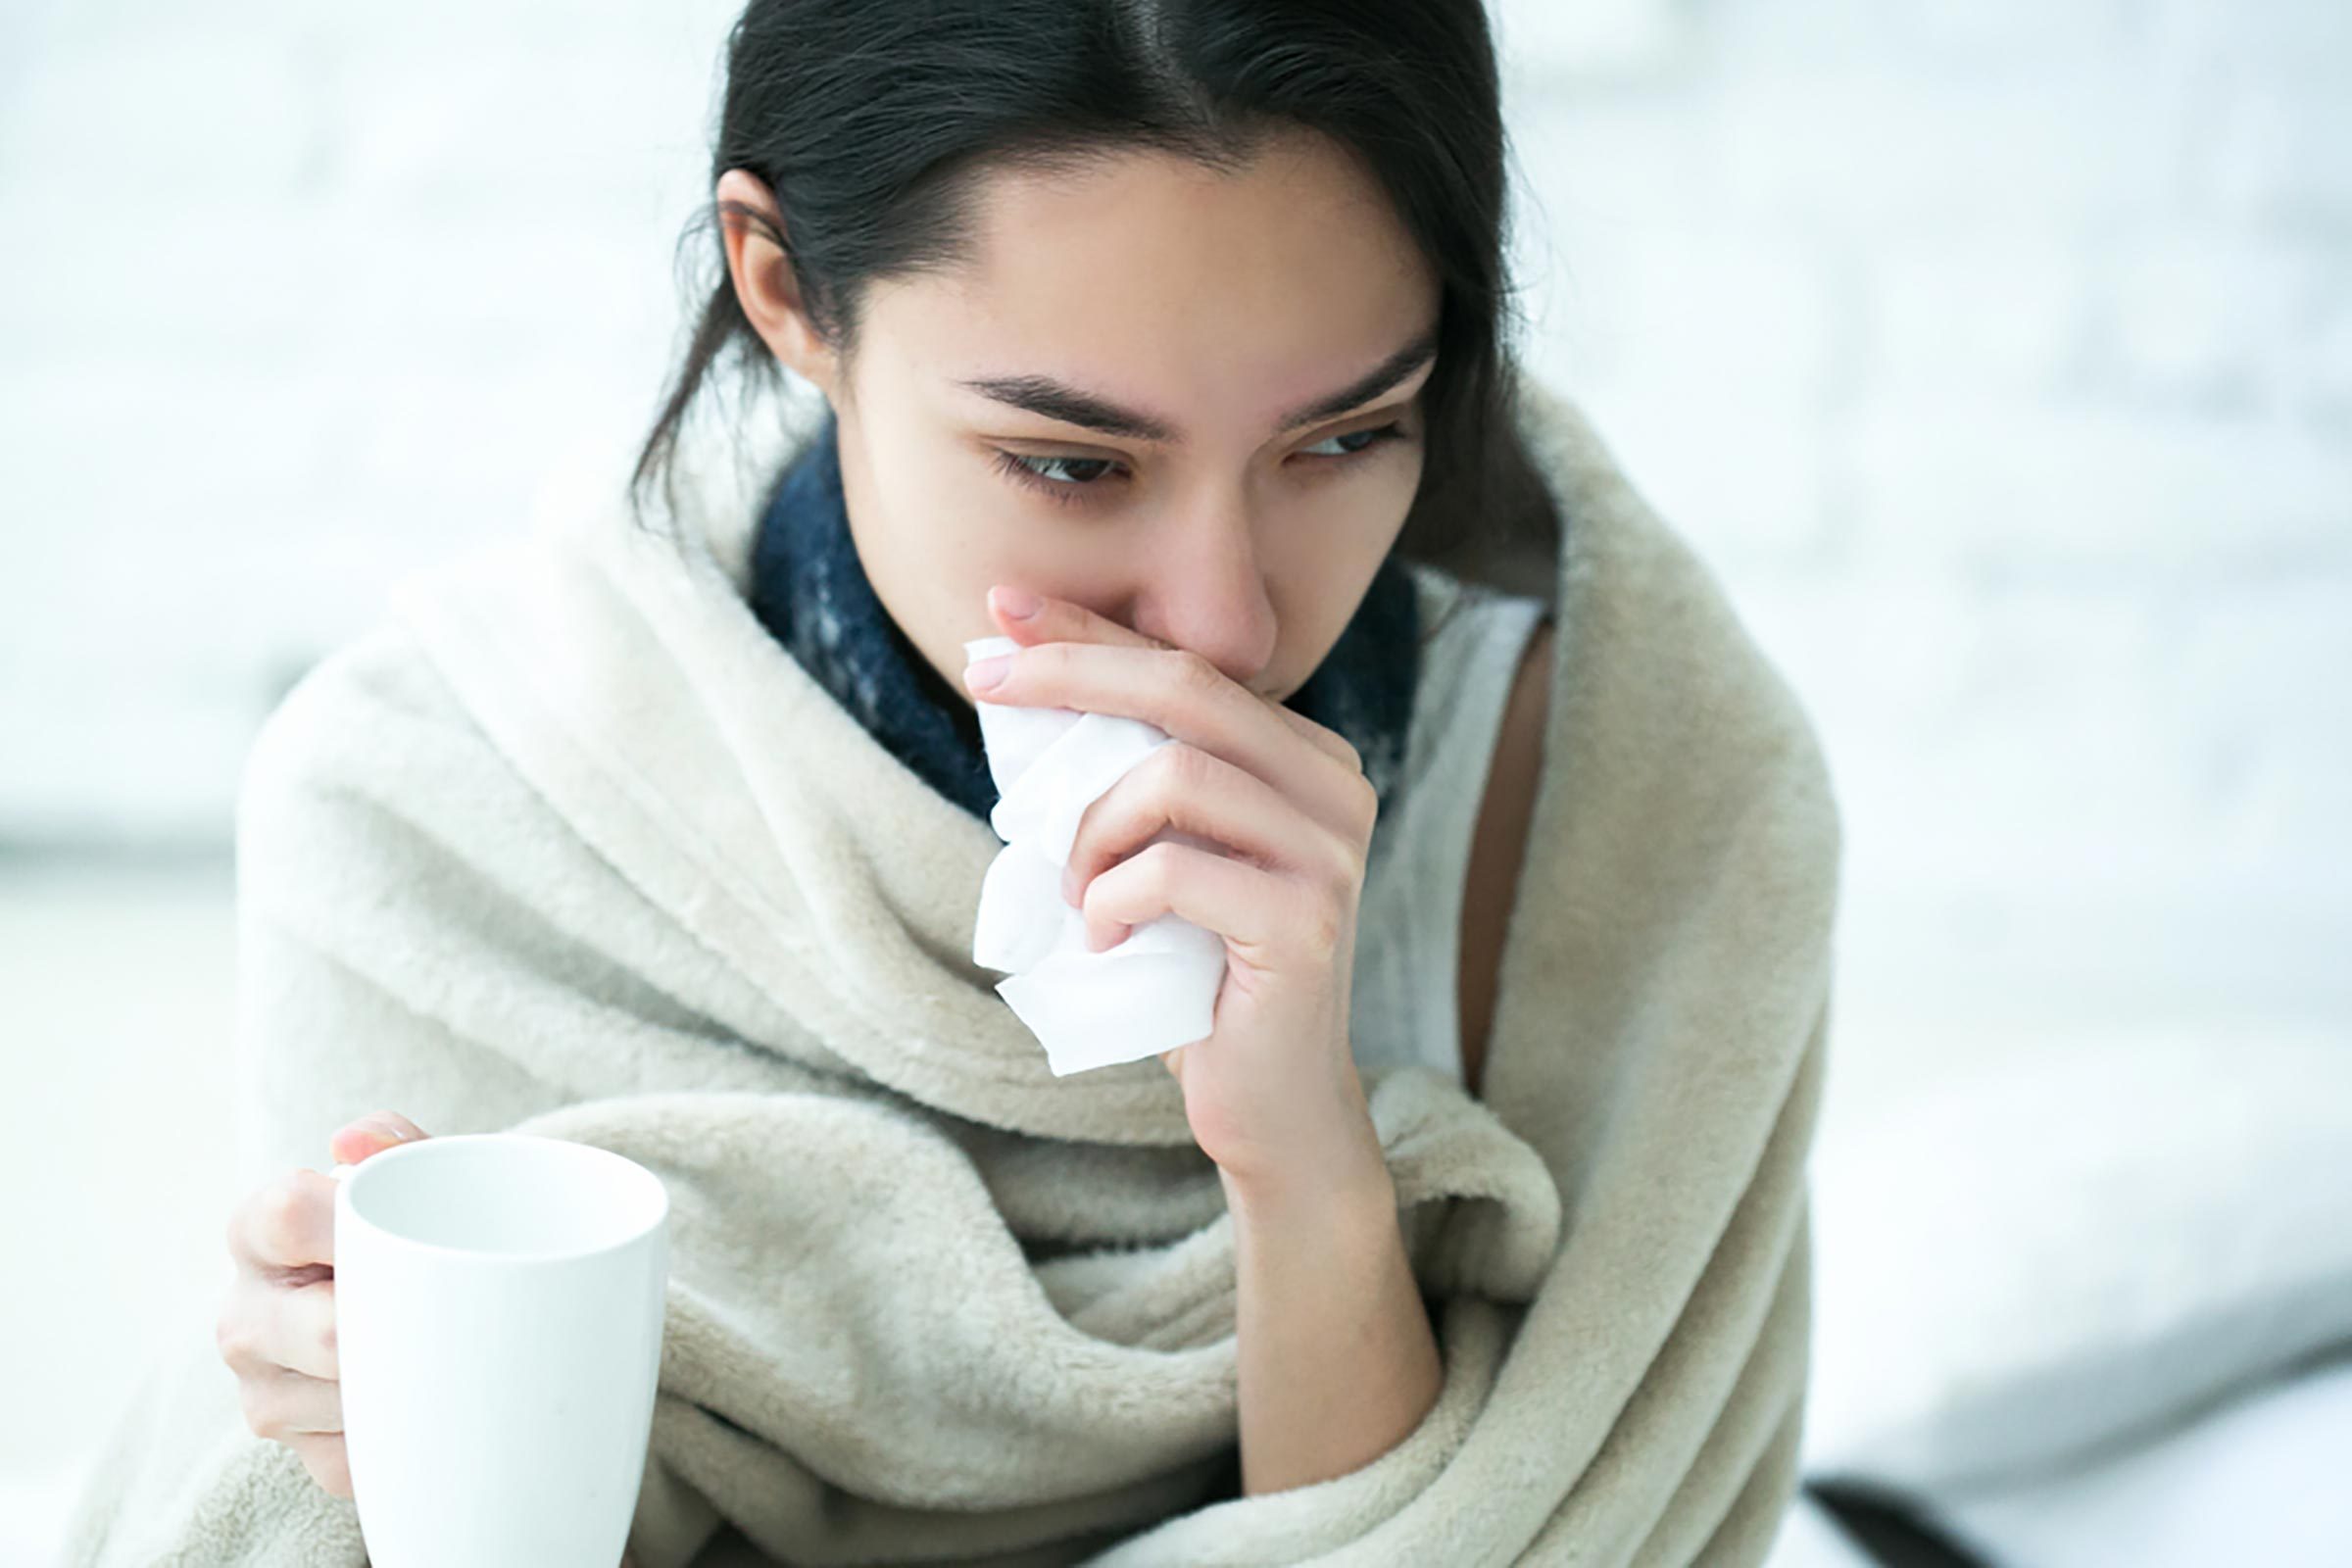 6 Home Remedies for Head Colds That Are Always Worth Trying